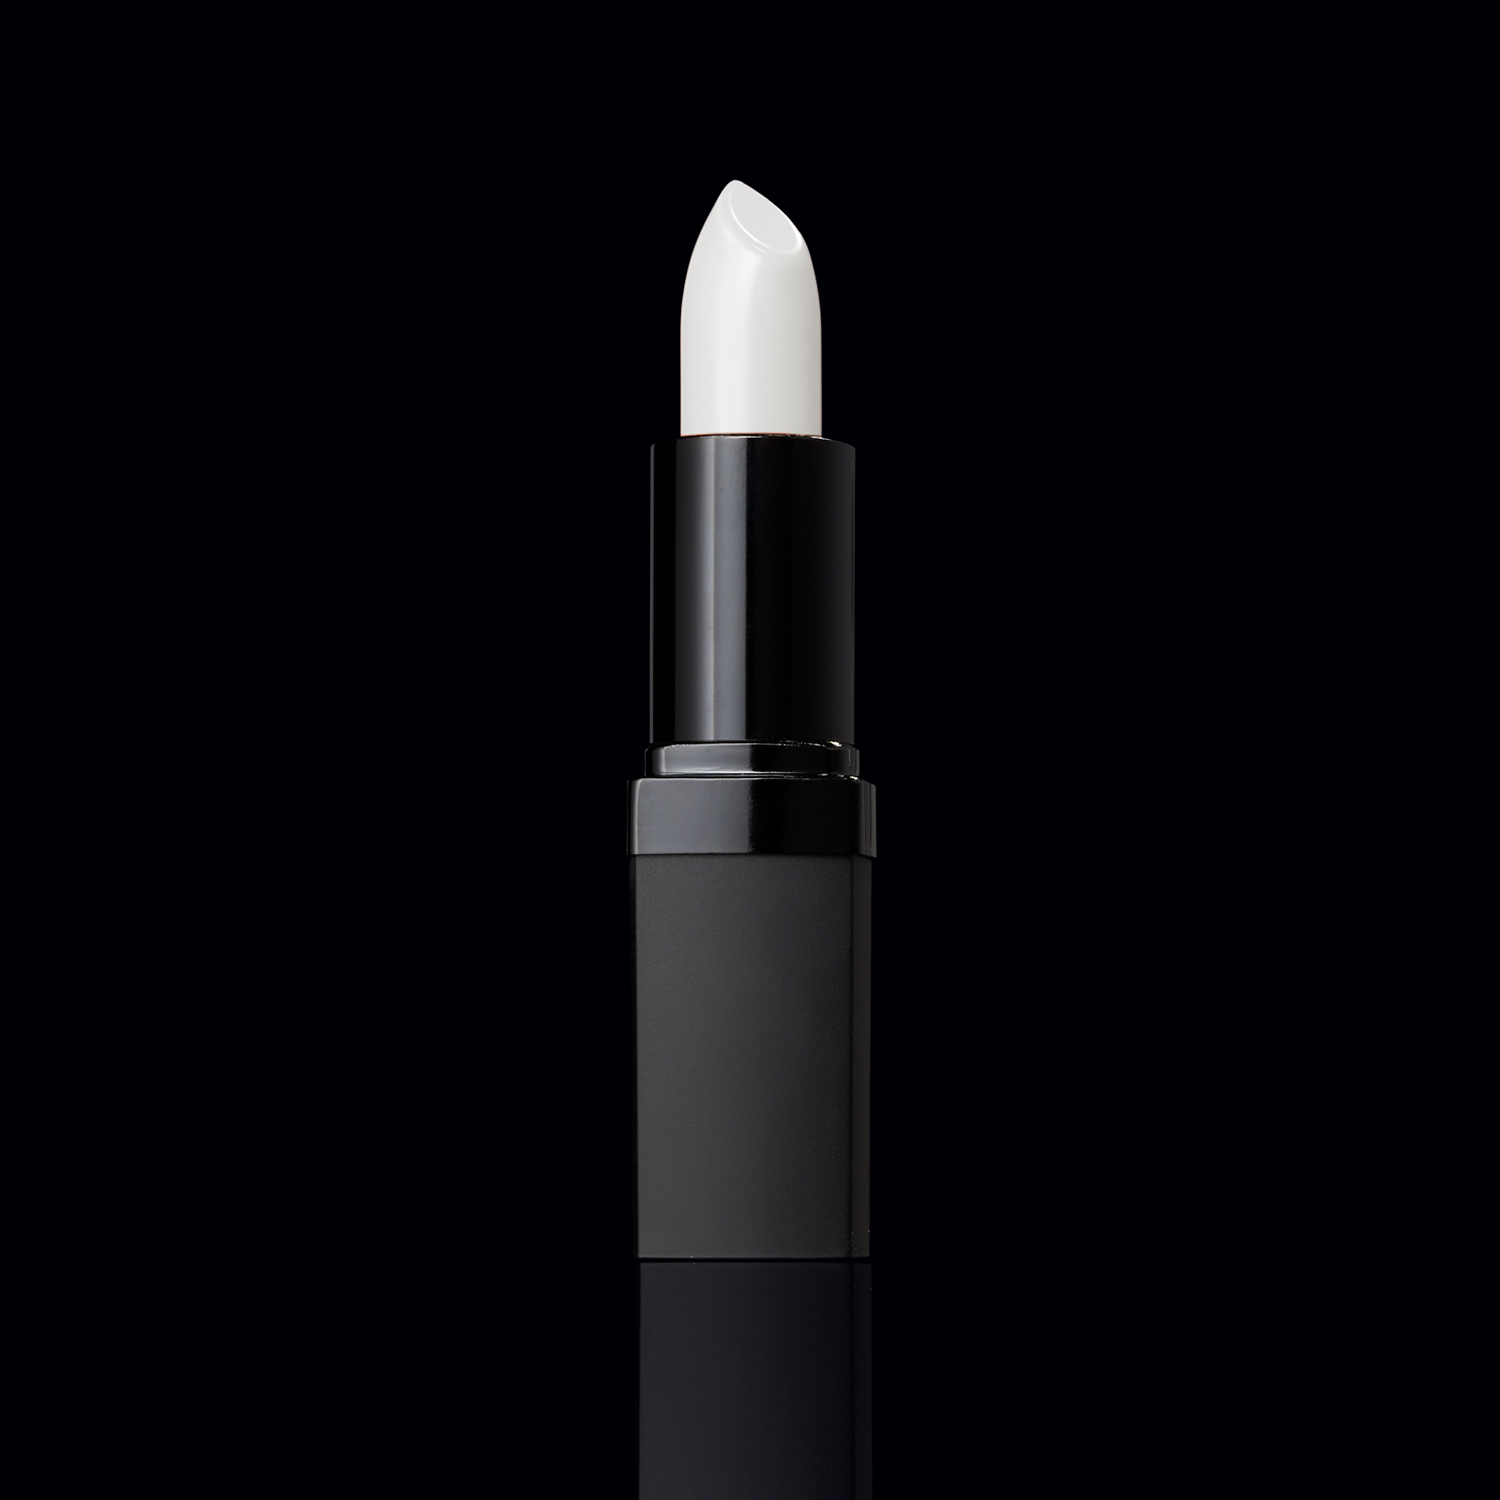 Vitamin E lipstick, buttery and soothing, comforts instantly. Apply as a treatment day or night.